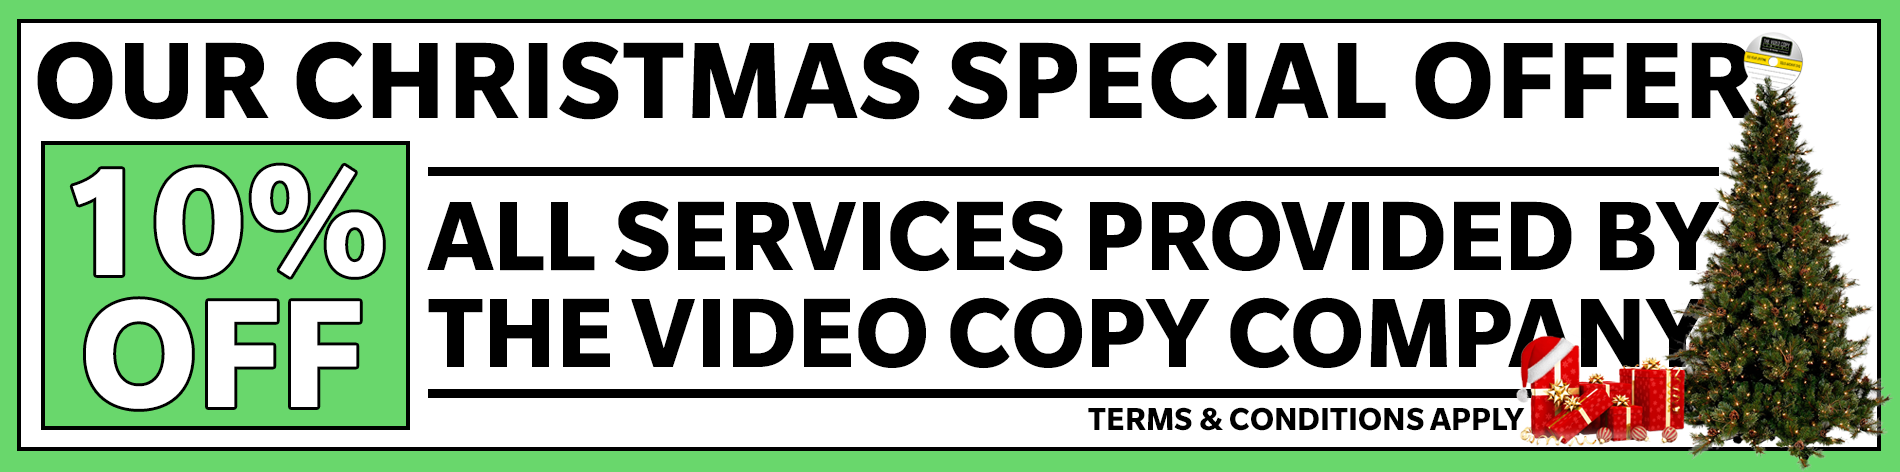 The Video Copy Company Monthly Offer Christmas